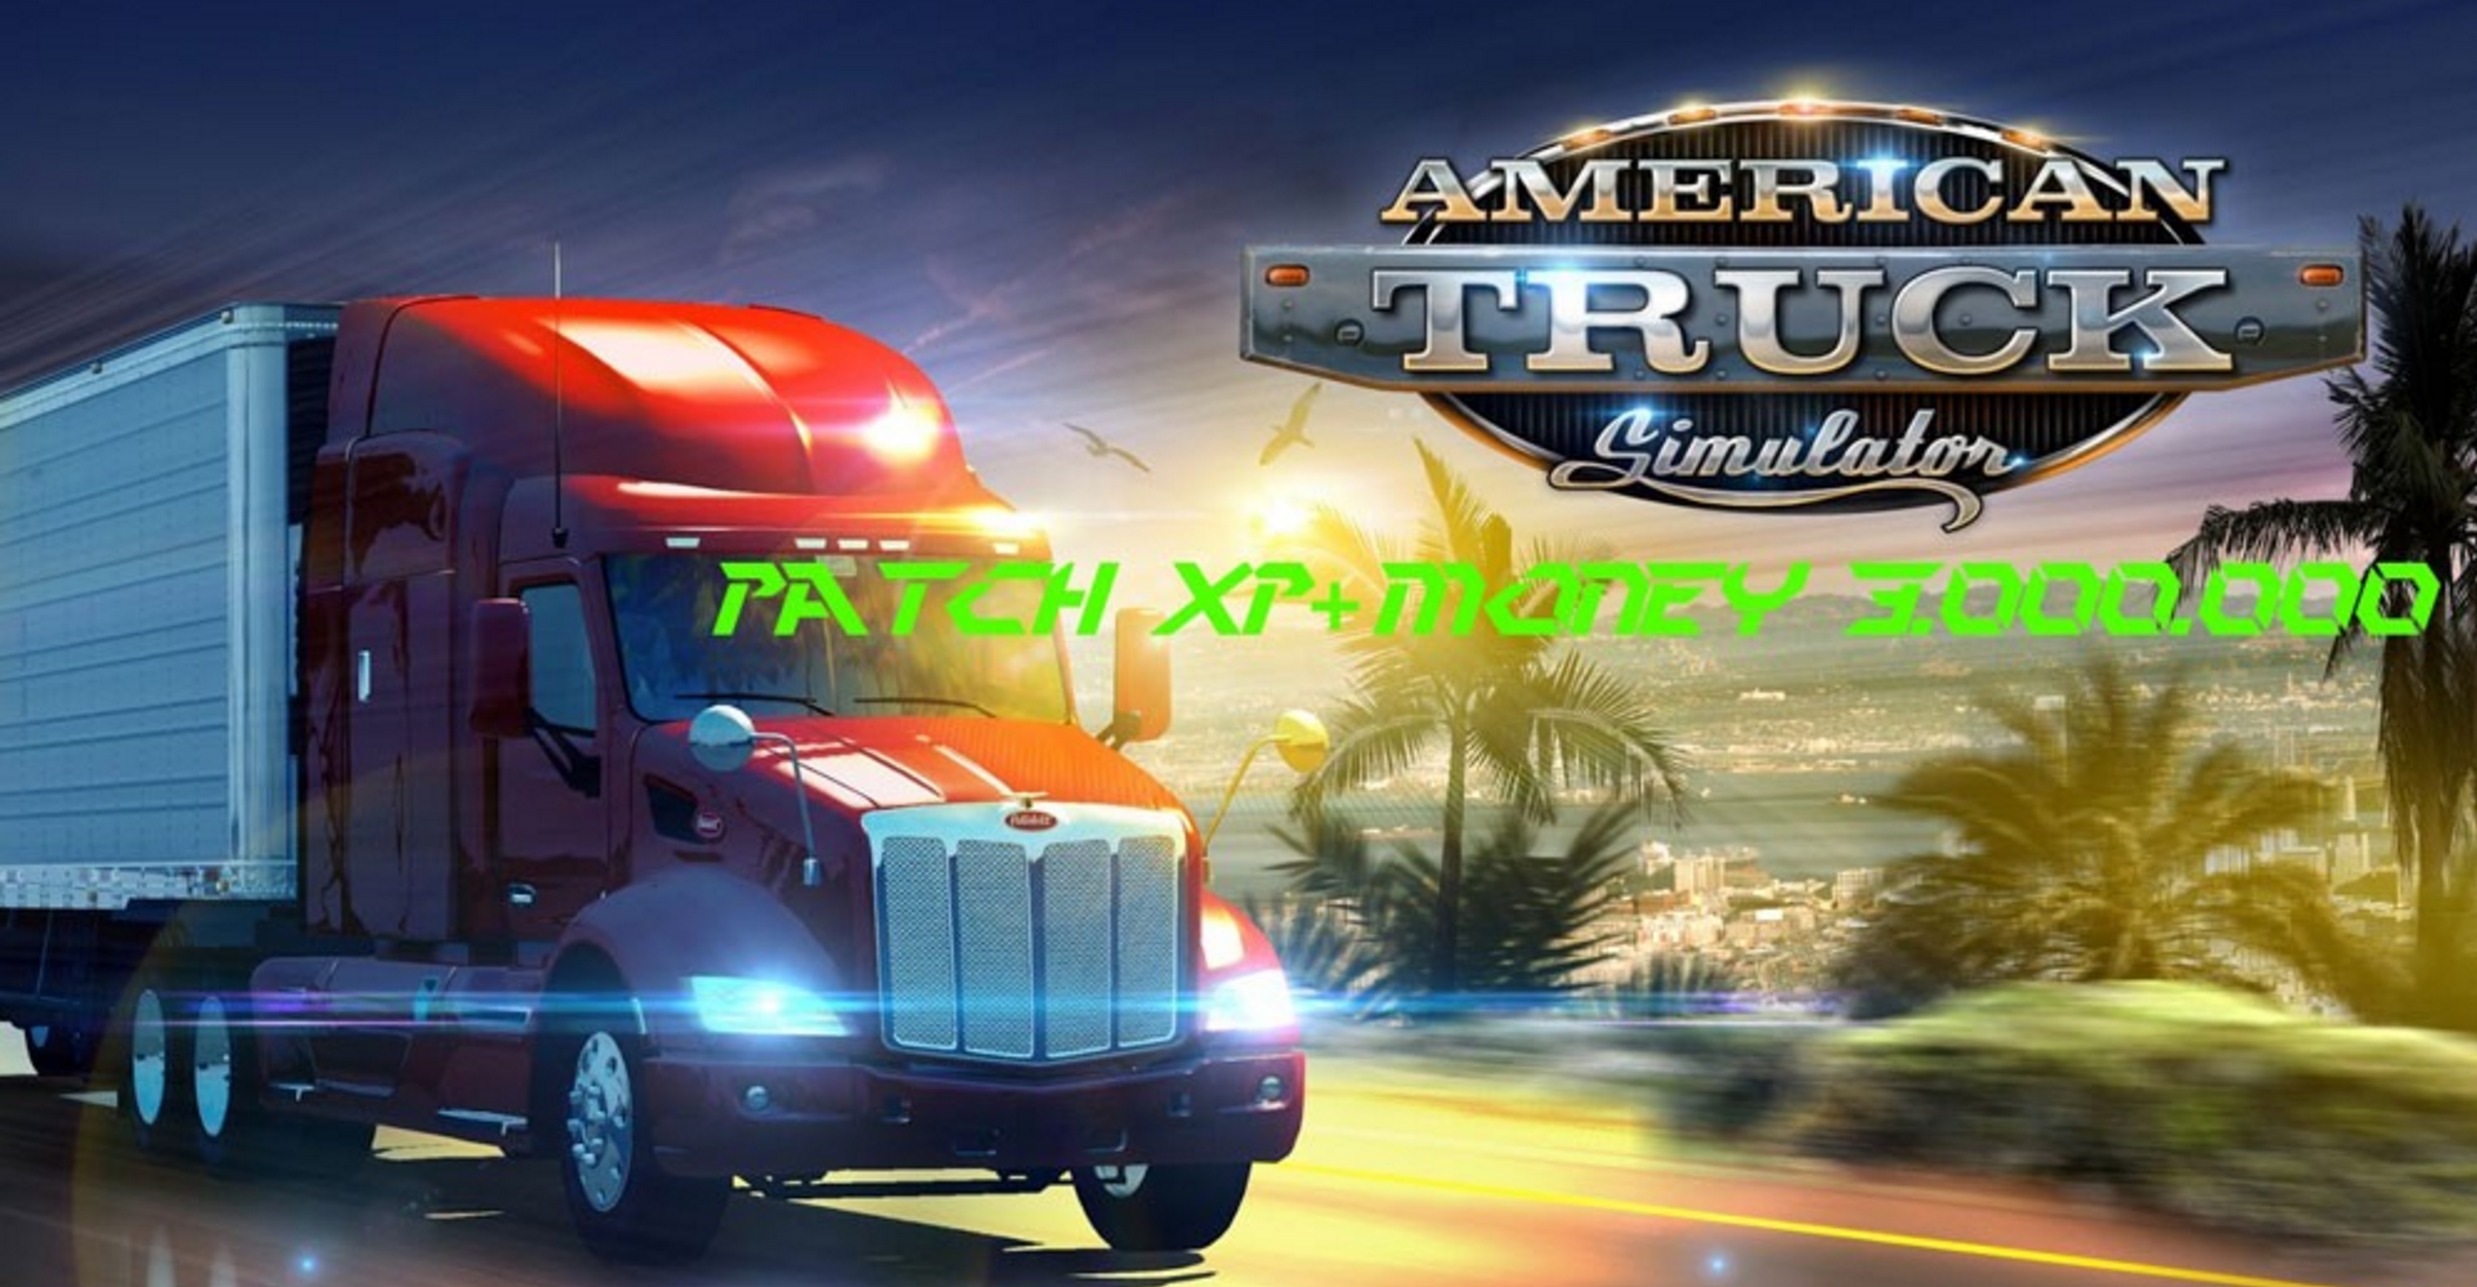 Patch Xp + Money 3.000.000 for ATS